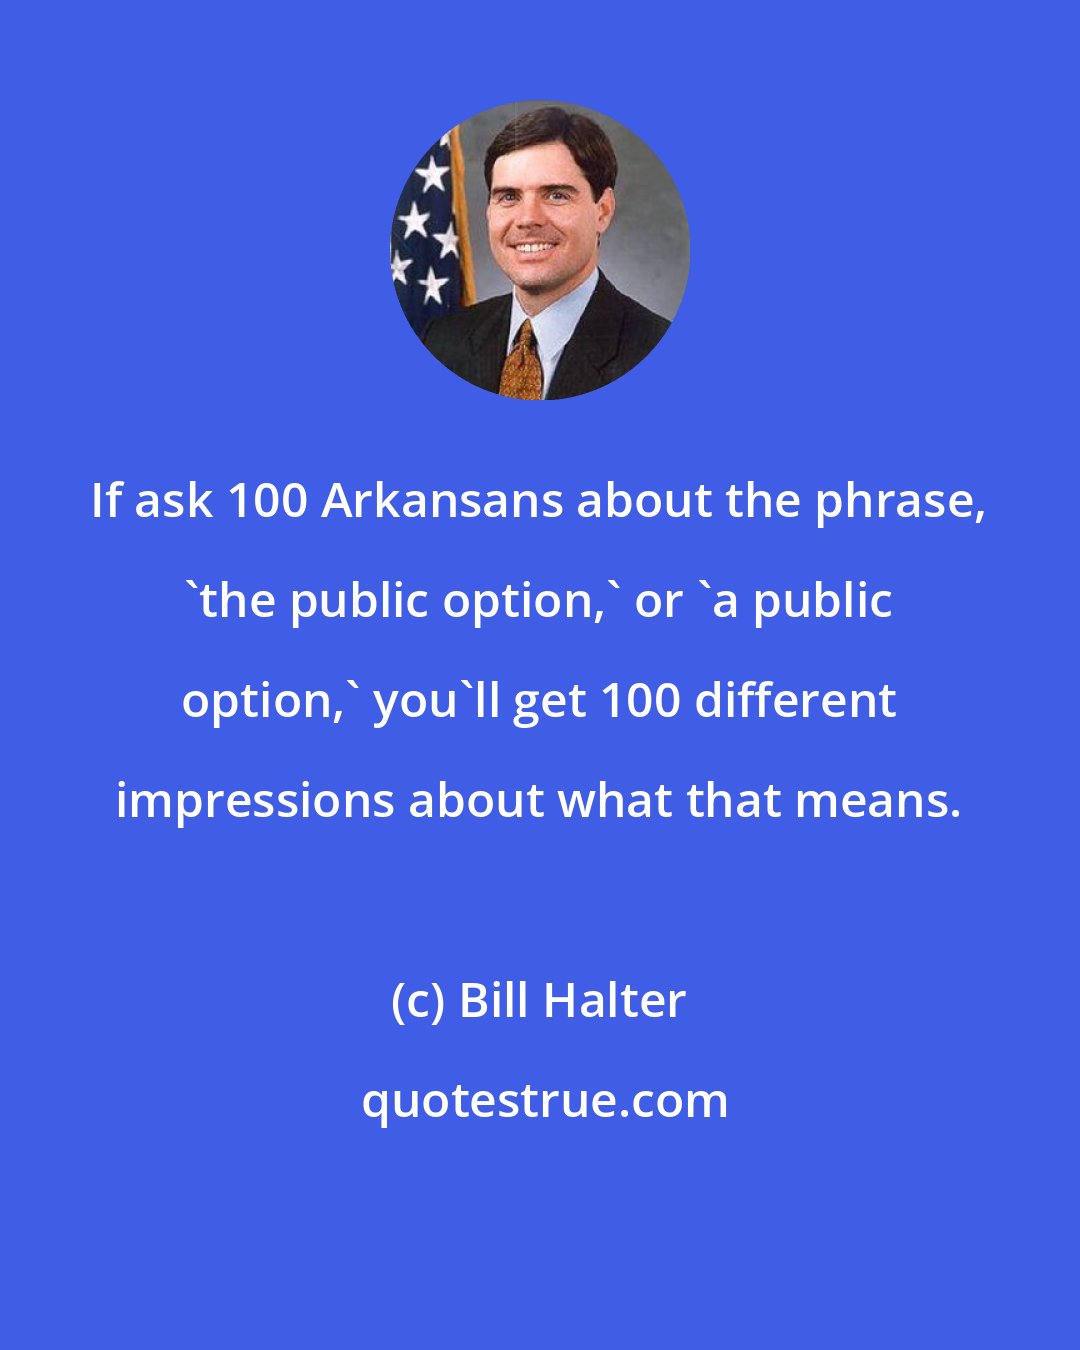 Bill Halter: If ask 100 Arkansans about the phrase, 'the public option,' or 'a public option,' you'll get 100 different impressions about what that means.